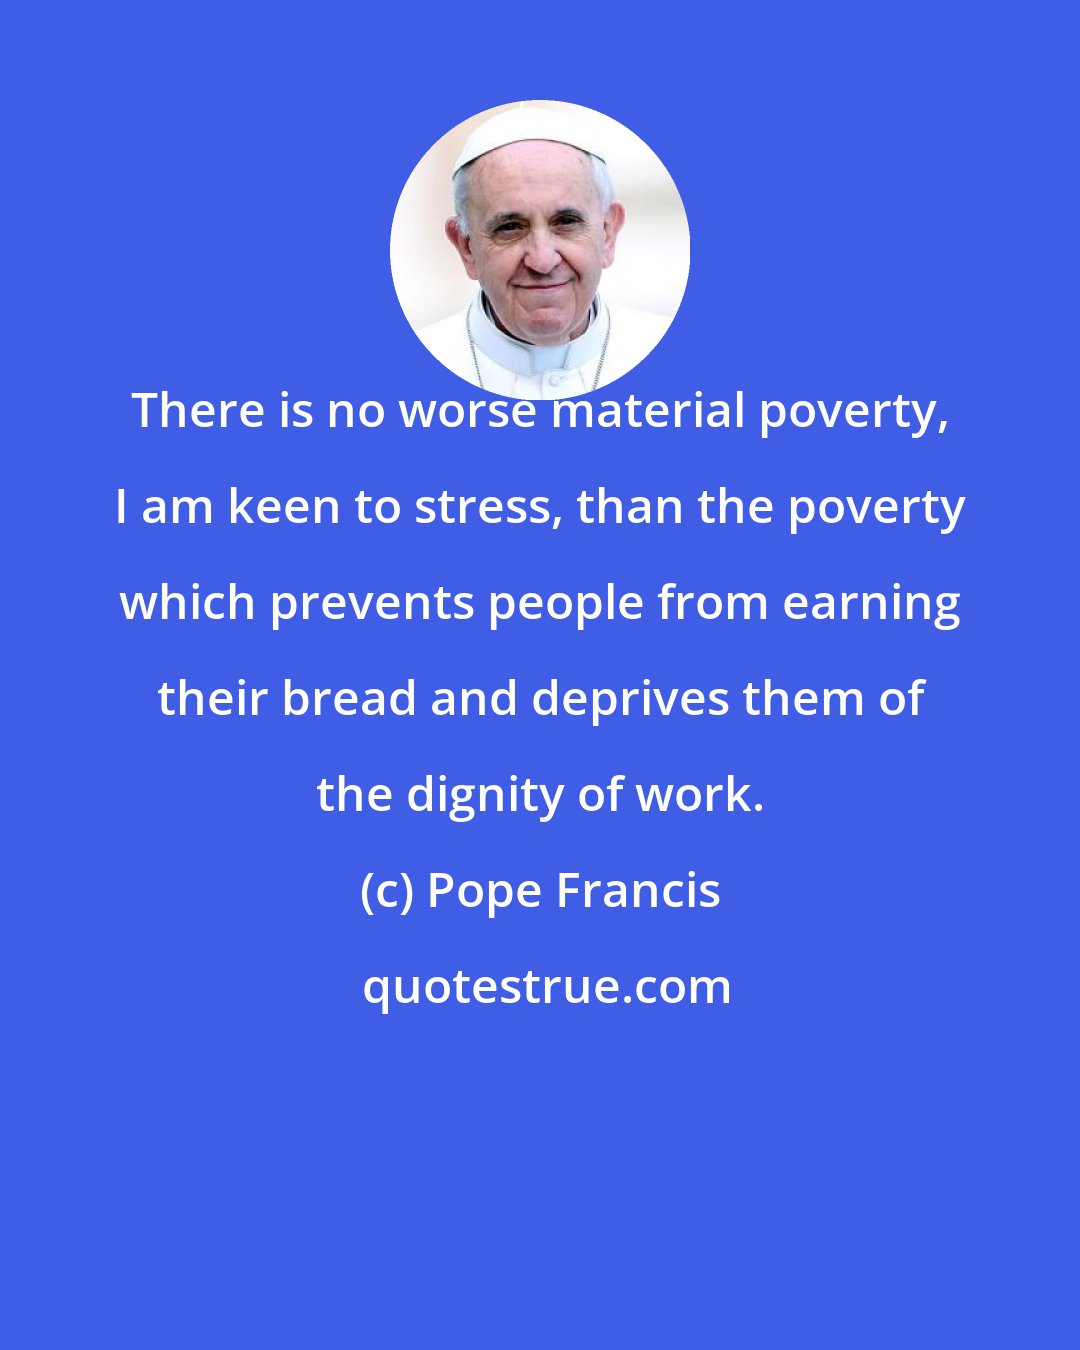 Pope Francis: There is no worse material poverty, I am keen to stress, than the poverty which prevents people from earning their bread and deprives them of the dignity of work.